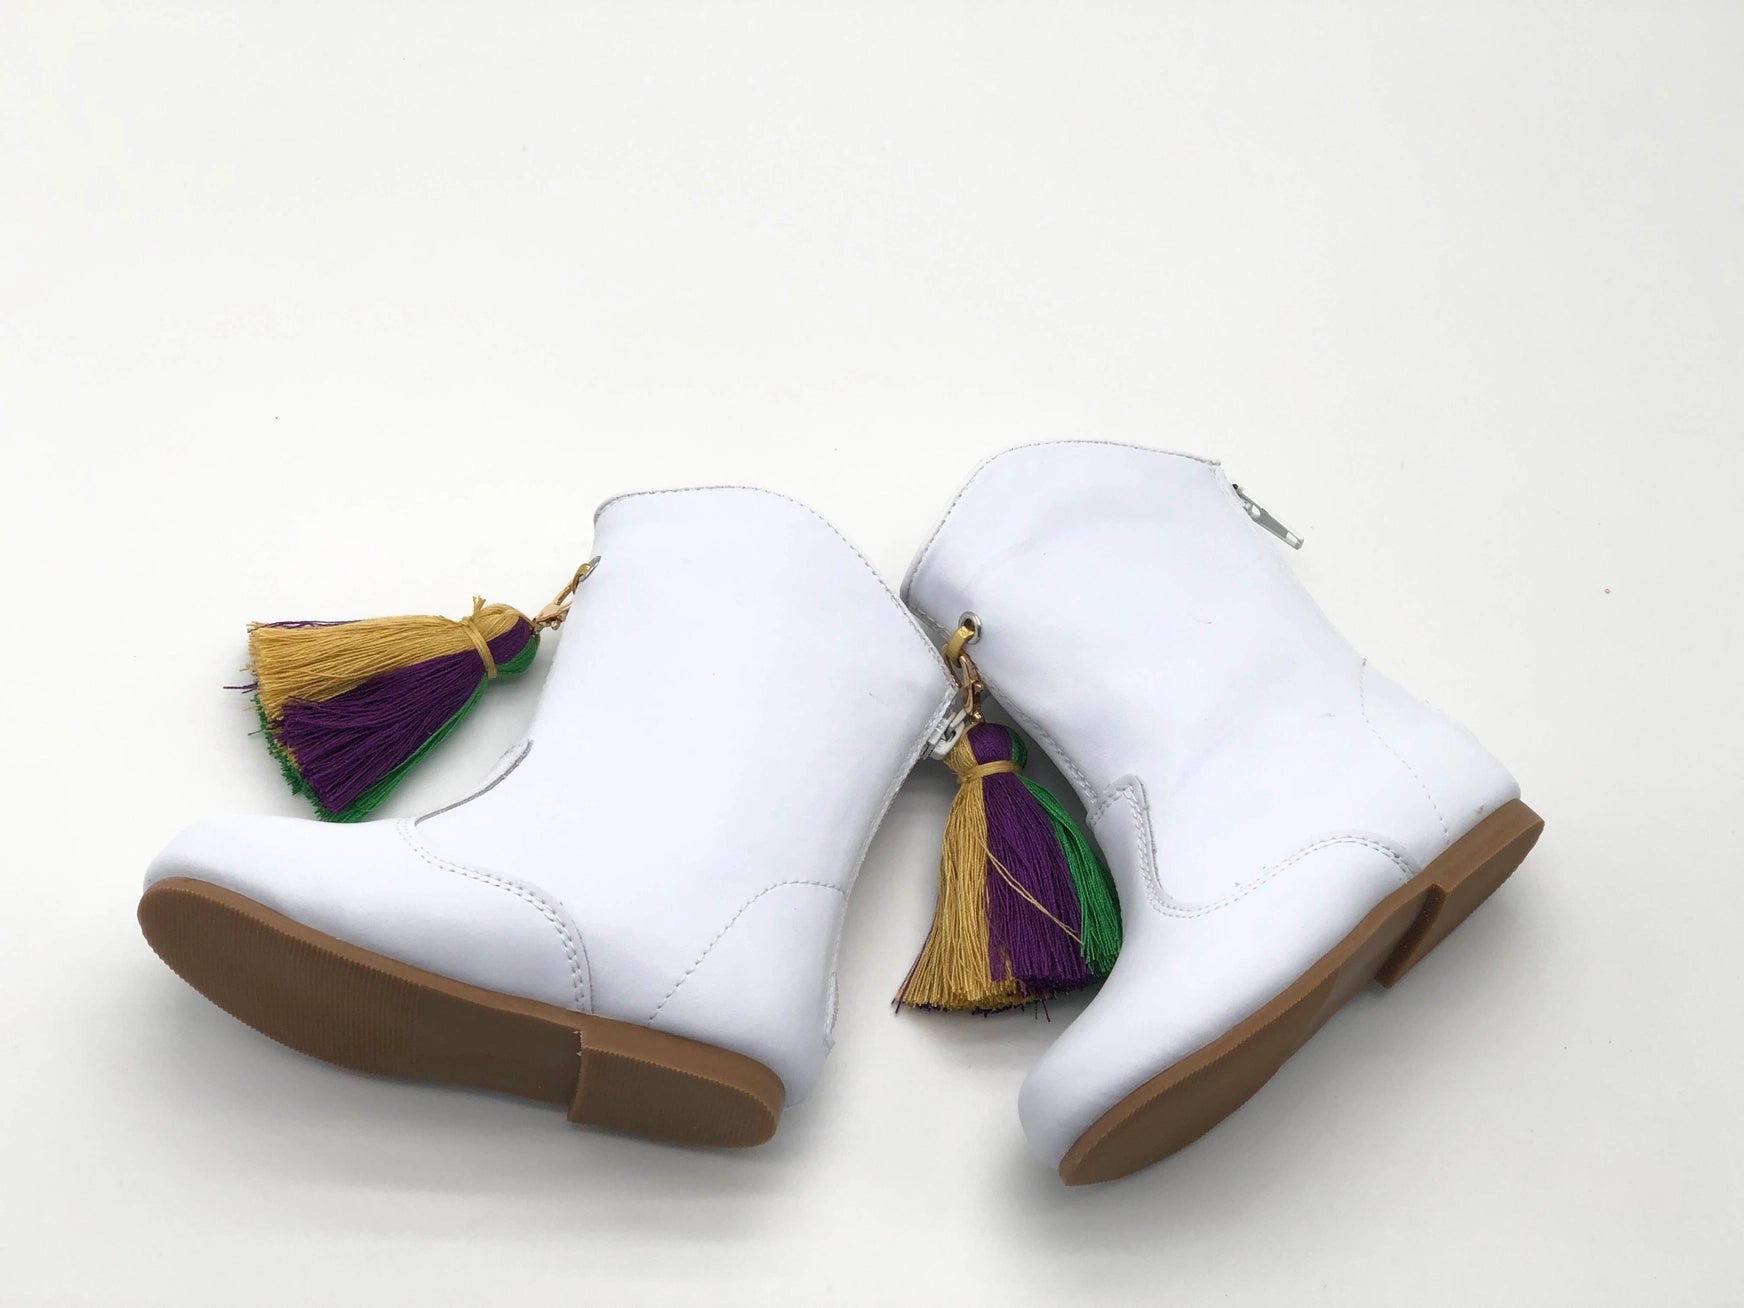 A pair of Infant & Kids Mardi Gras Boots by SeersuckerJOEY LLC with tassels on them.